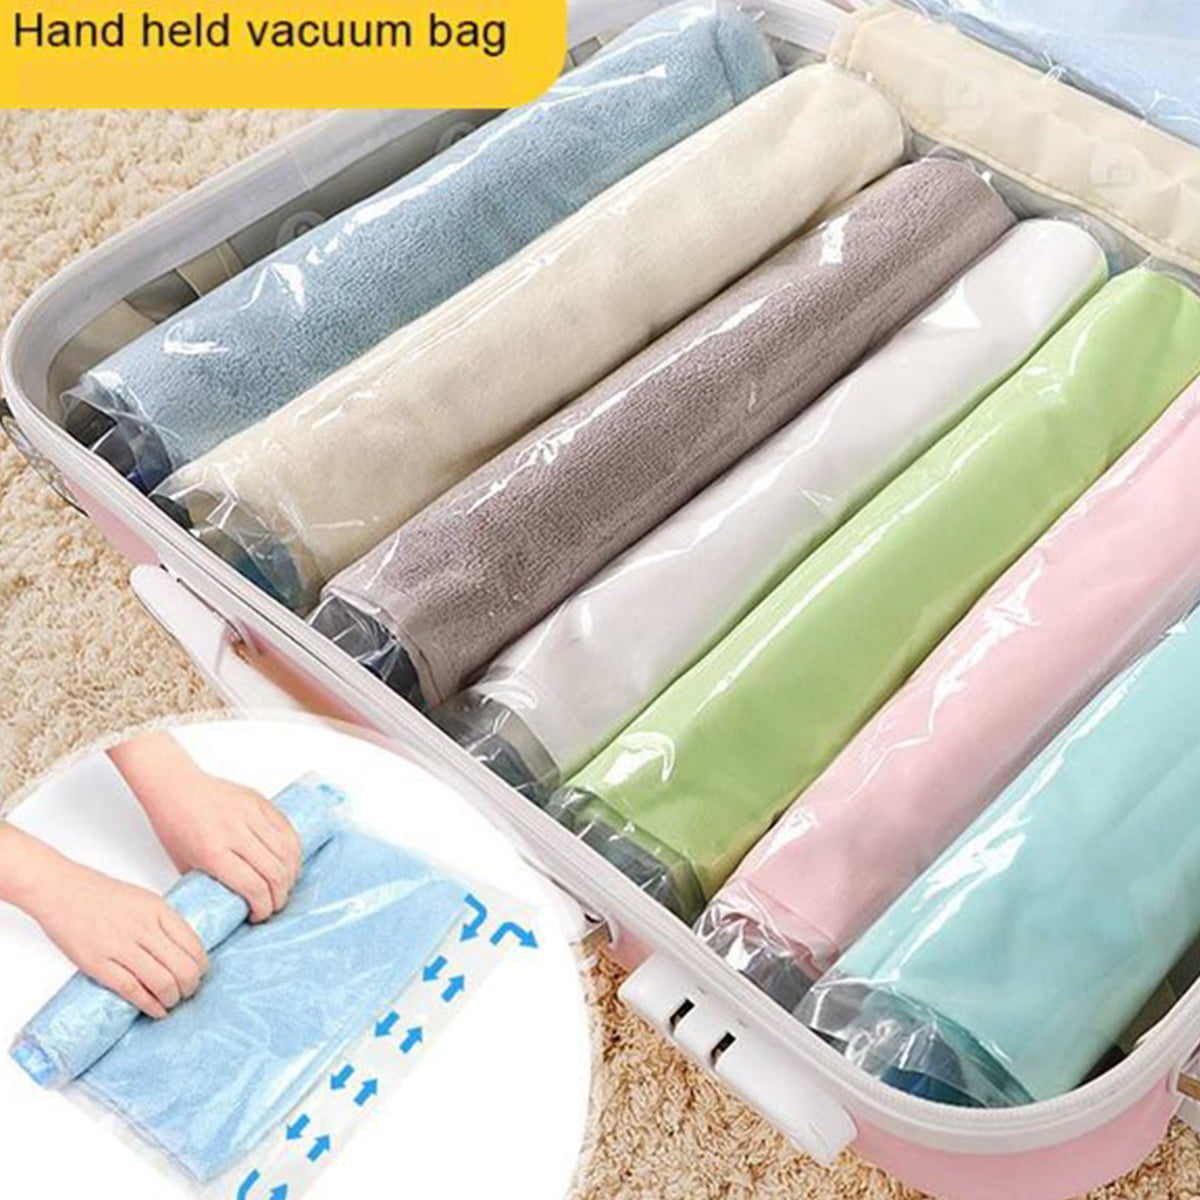 4 Pack Compression Bags for Travel, Vacuum Storage Bags for Travel  Essentials, Space Saver Bags for Cruise Travel Accessories